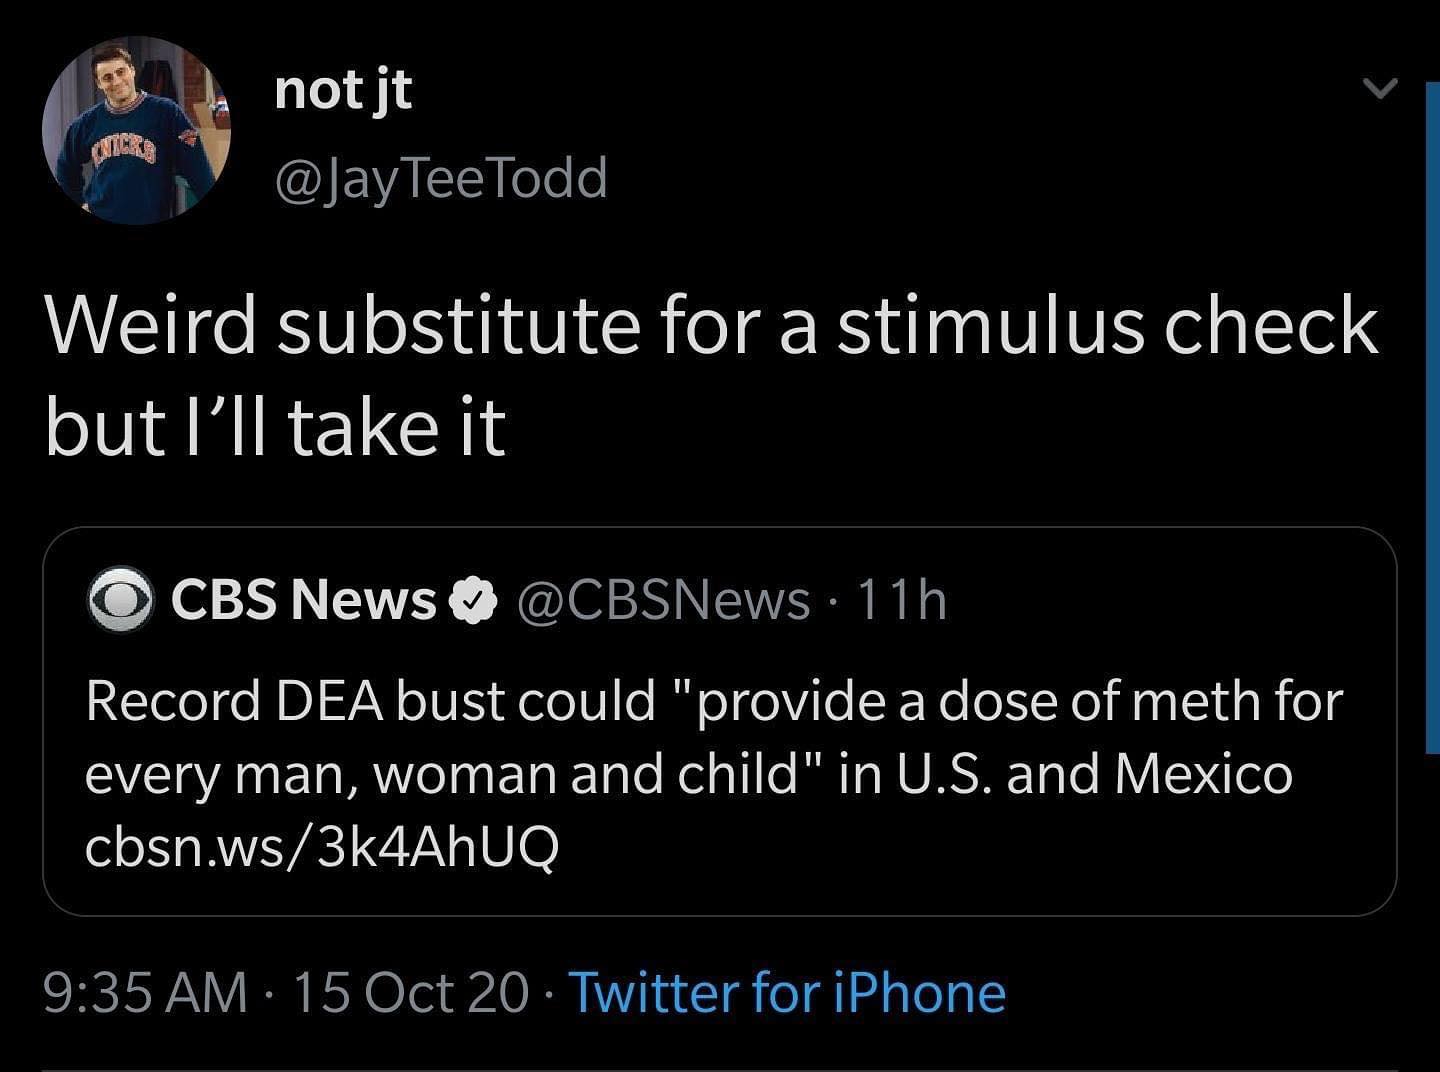 screenshot - not jt TeeTodd Weird substitute for a stimulus check but I'll take it Cbs News 11h Record Dea bust could "provide a dose of meth for every man, woman and child" in U.S. and Mexico cbsn.ws3k4AhUQ 15 Oct 20 Twitter for iPhone